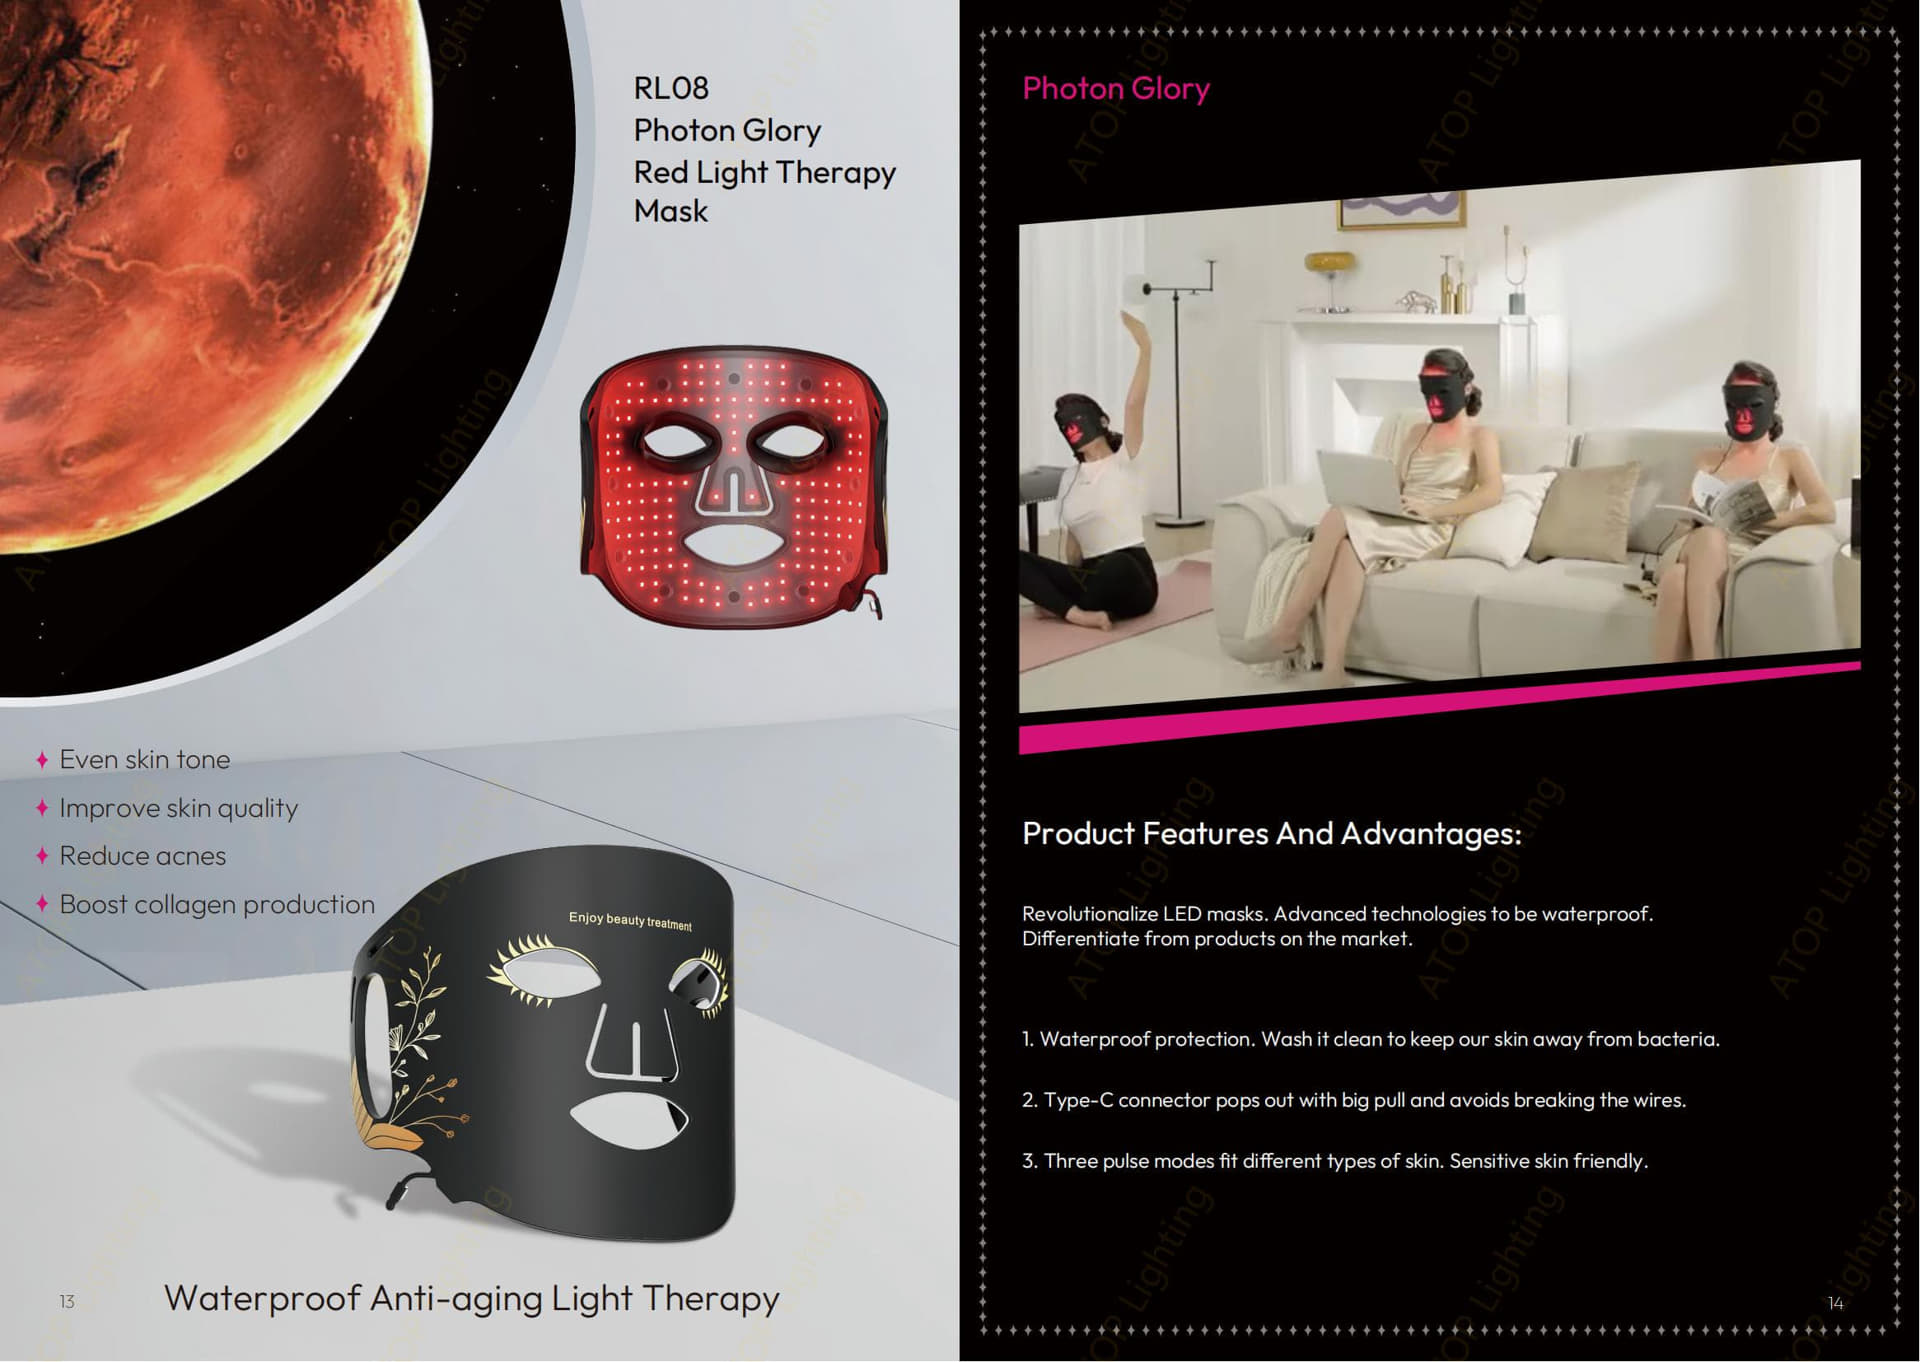 RL08 Photon Glory Red Light Therapy Mask 09